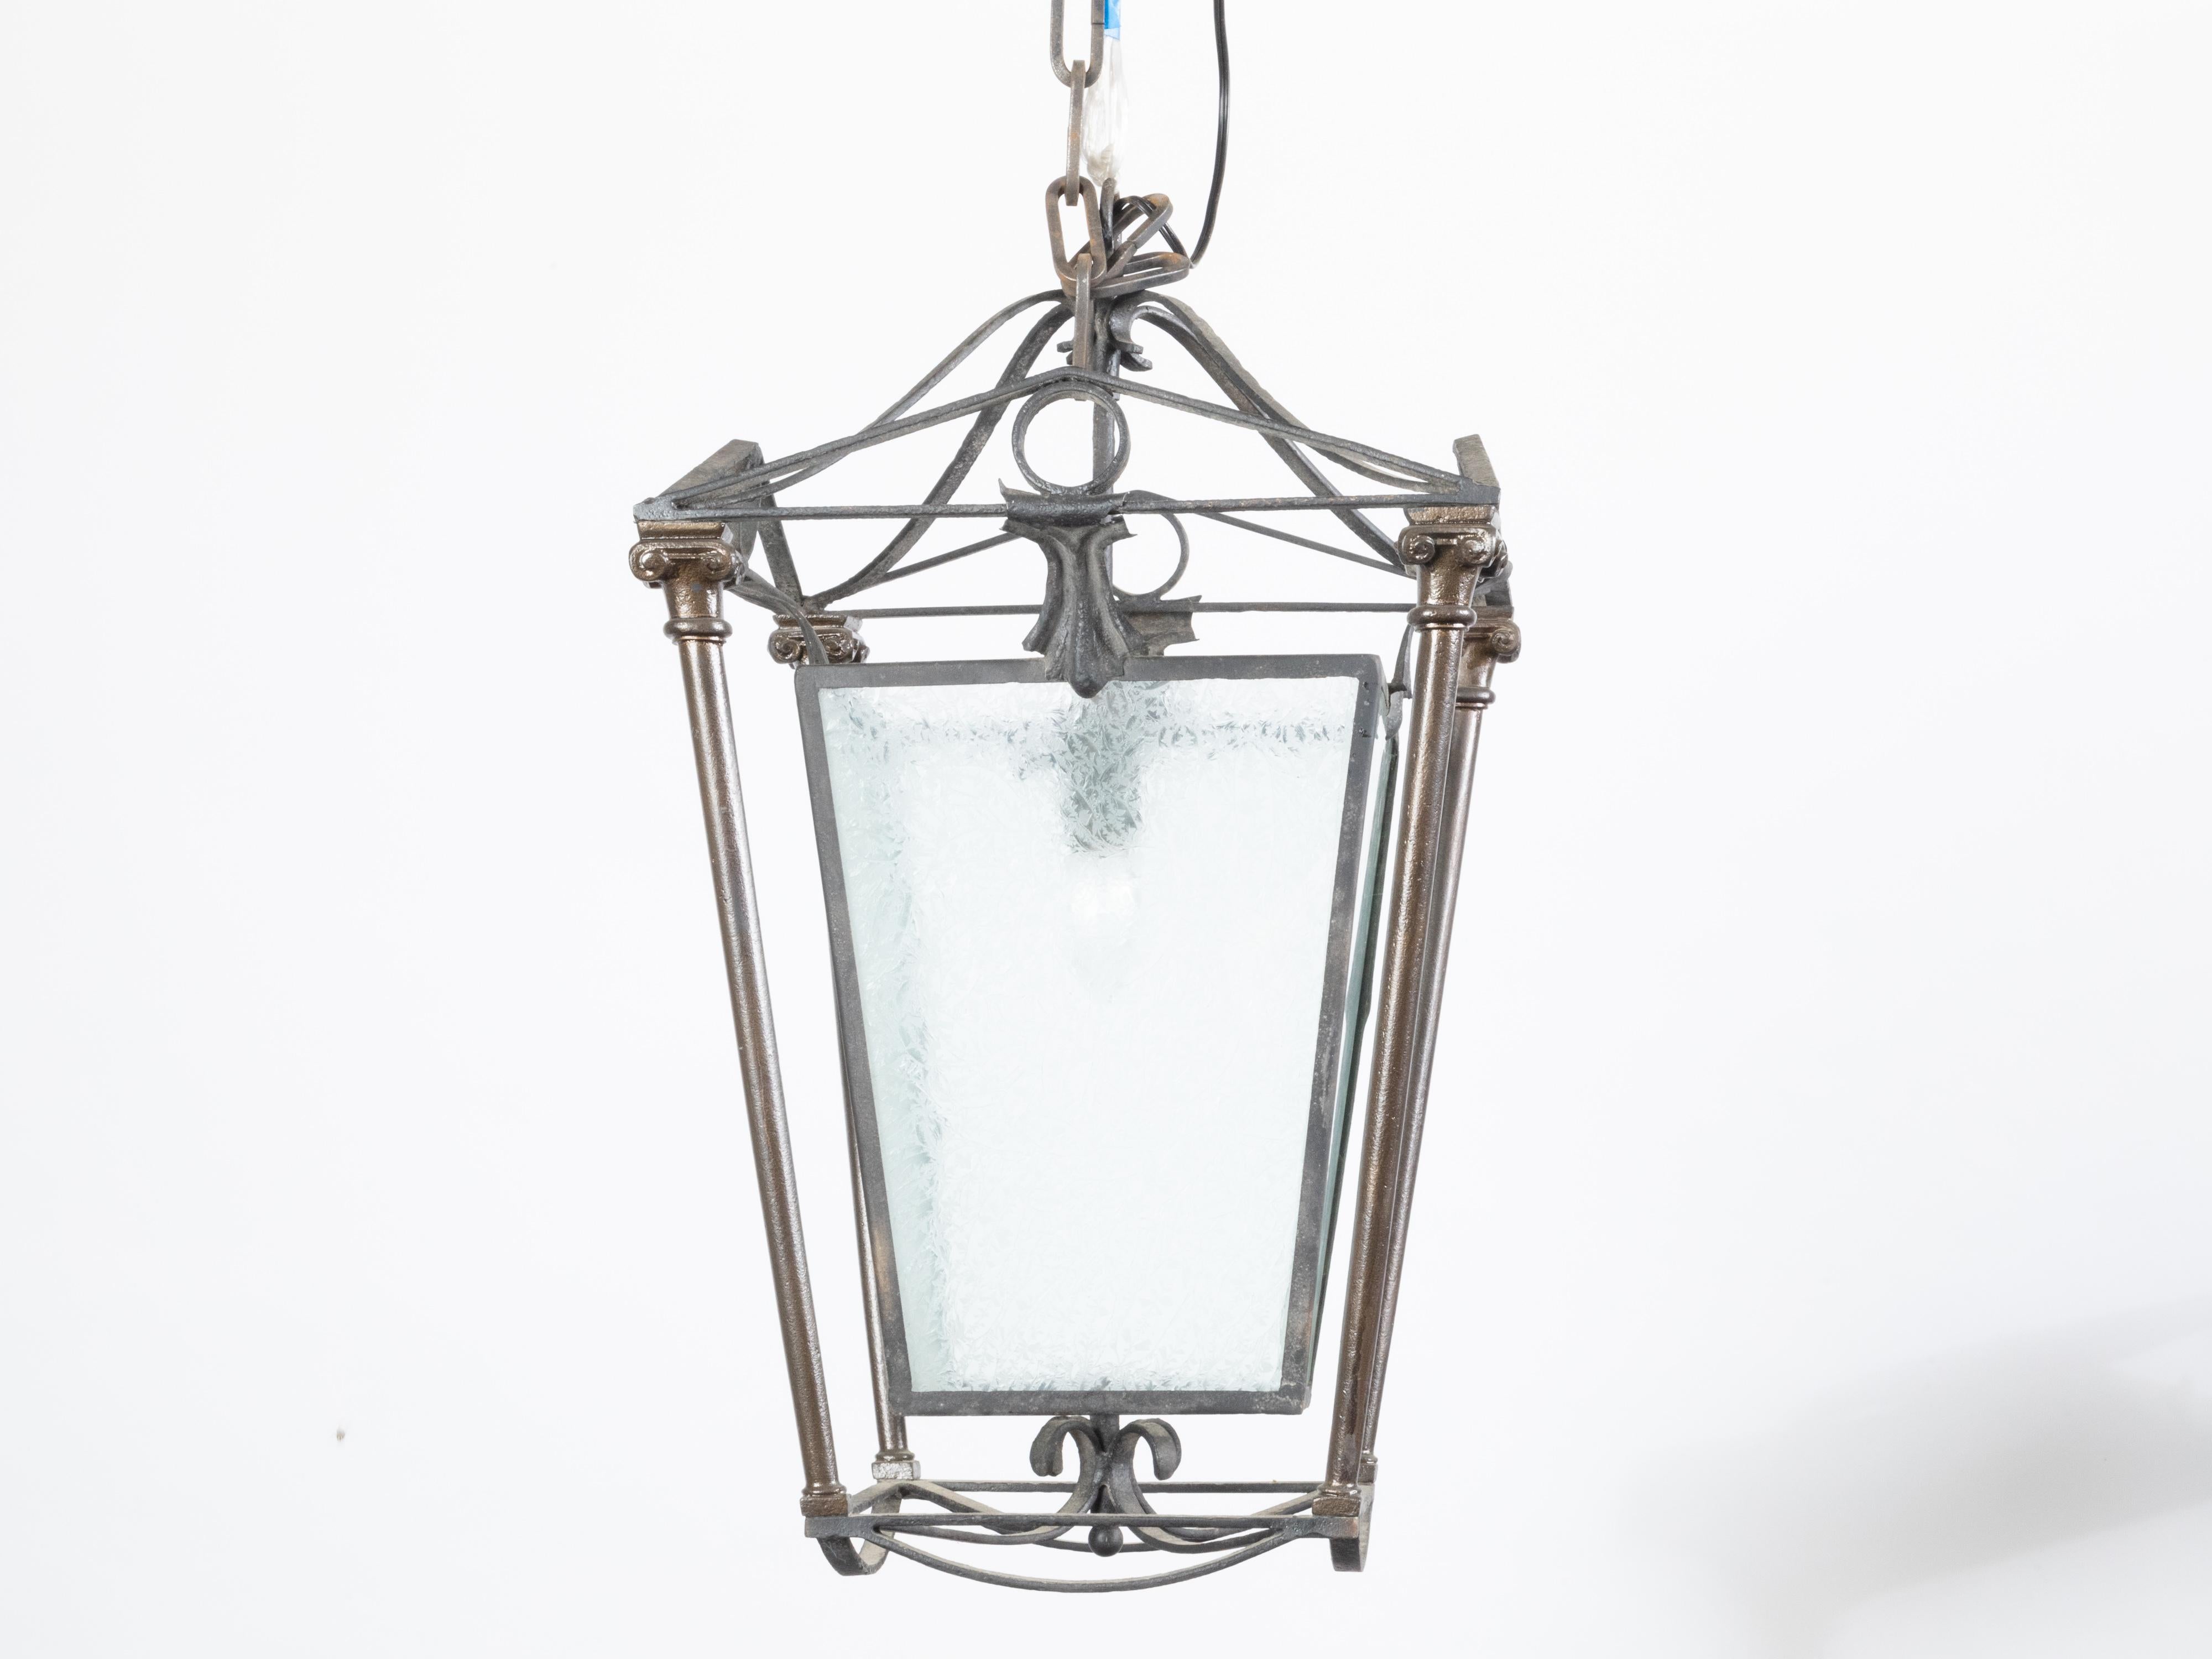 An English iron and brass lantern from the early 20th century, with single light and frosted glass panels. Created in England during the first quarter of the 20th century, this iron and brass lantern features four frosted glass panels securing a